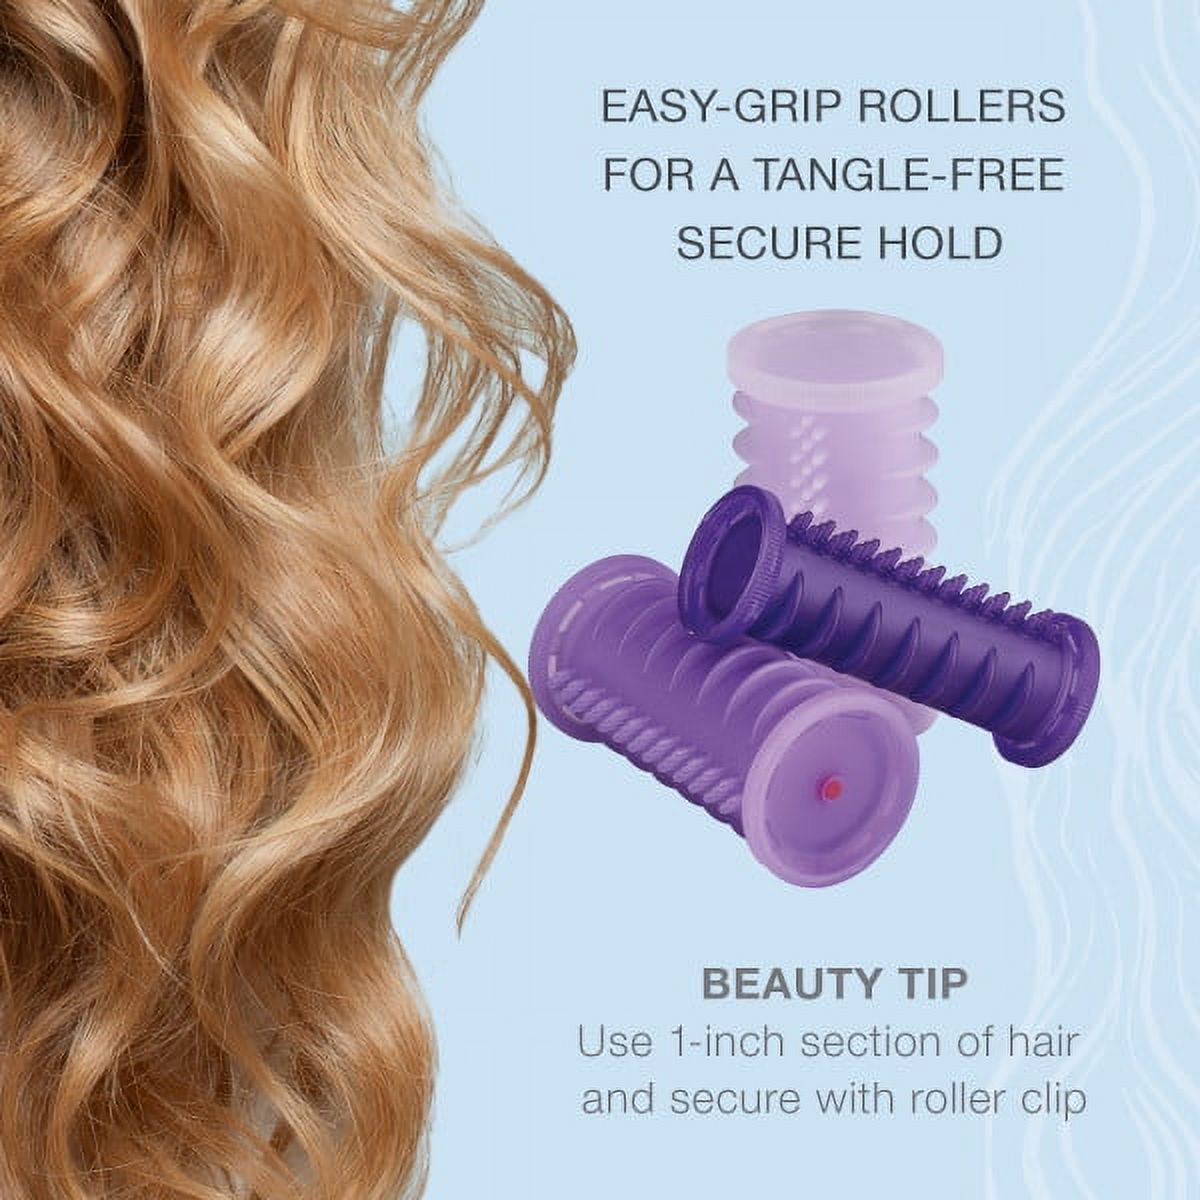 Conair EasyStart Hot Rollers, Create Curls and Waves That Last with 20 Assorted Hot Rollers and 20 Metal Pins, HS11RX - image 5 of 7